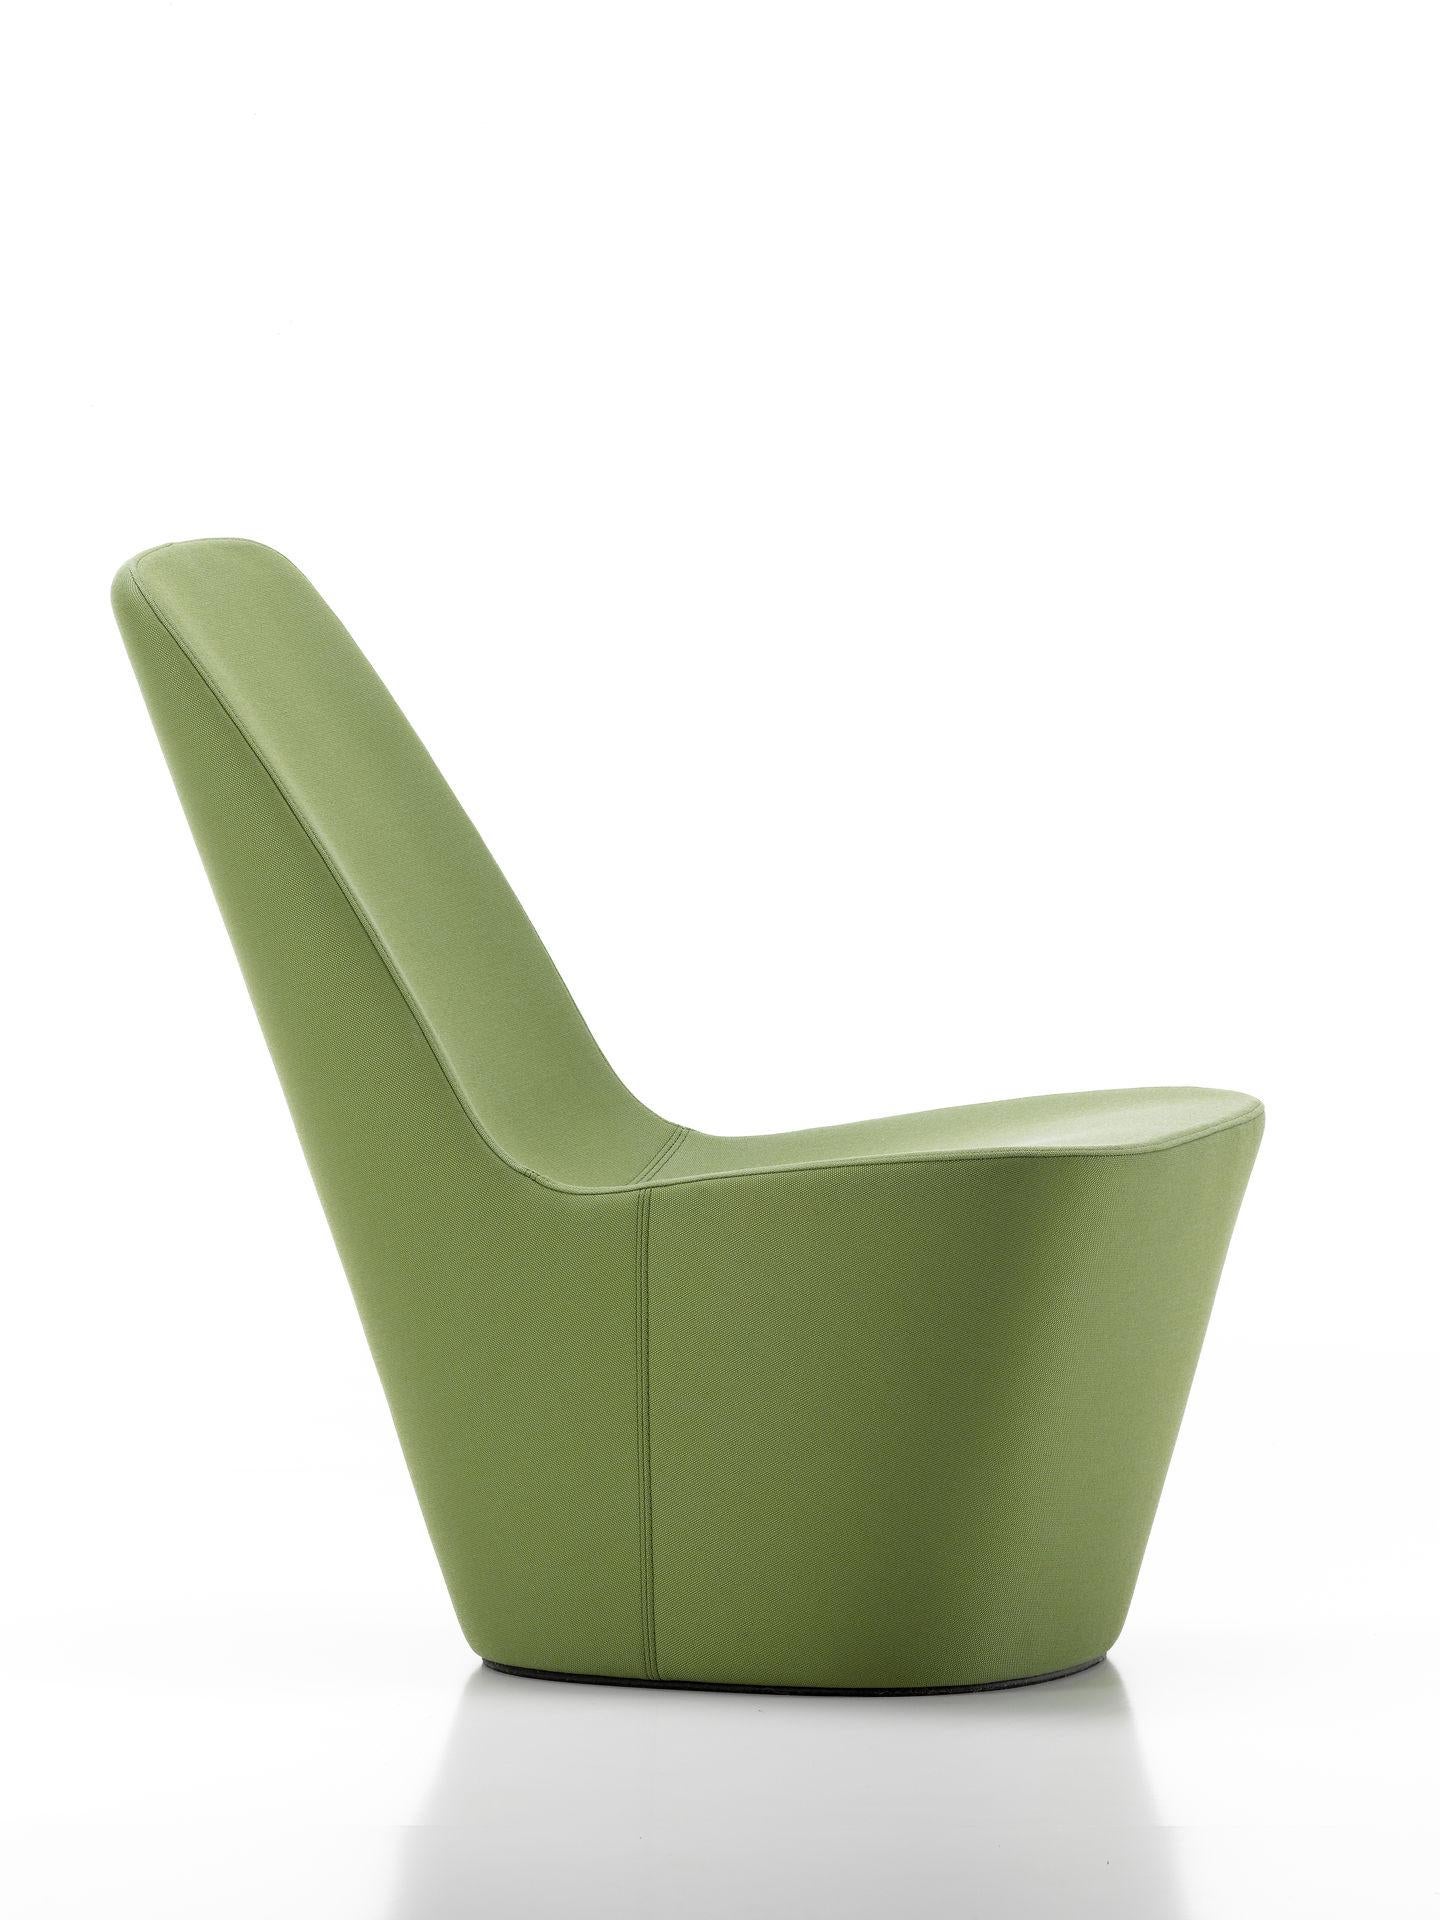 Sculptural chair designed by Jasper Morrison in 2008.
Manufactured by Vitra, Switzerland.

Monopod, the compact sculptural visitor chair by Jasper Morrison, is a perfect companion for sofas and larger armchairs in different interiors and spaces.